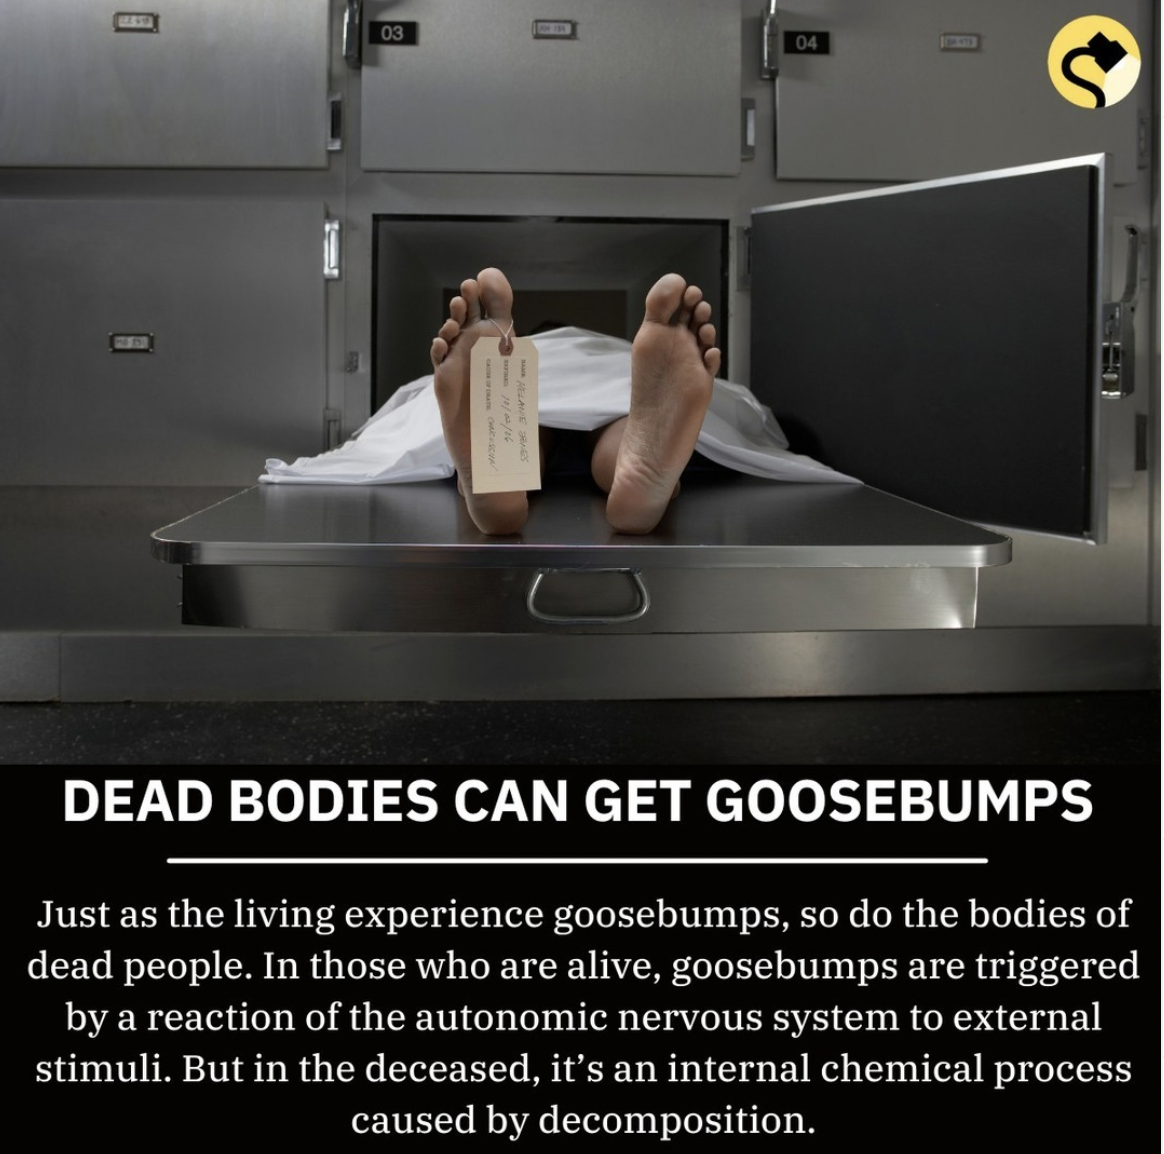 Snopes Facts - death fridge - 03 D 04 Dead Bodies Can Get Goosebumps Just as the living experience goosebumps, so do the bodies of dead people. In those who are alive, goosebumps are triggered by a reaction of the autonomic nervous system to external stim